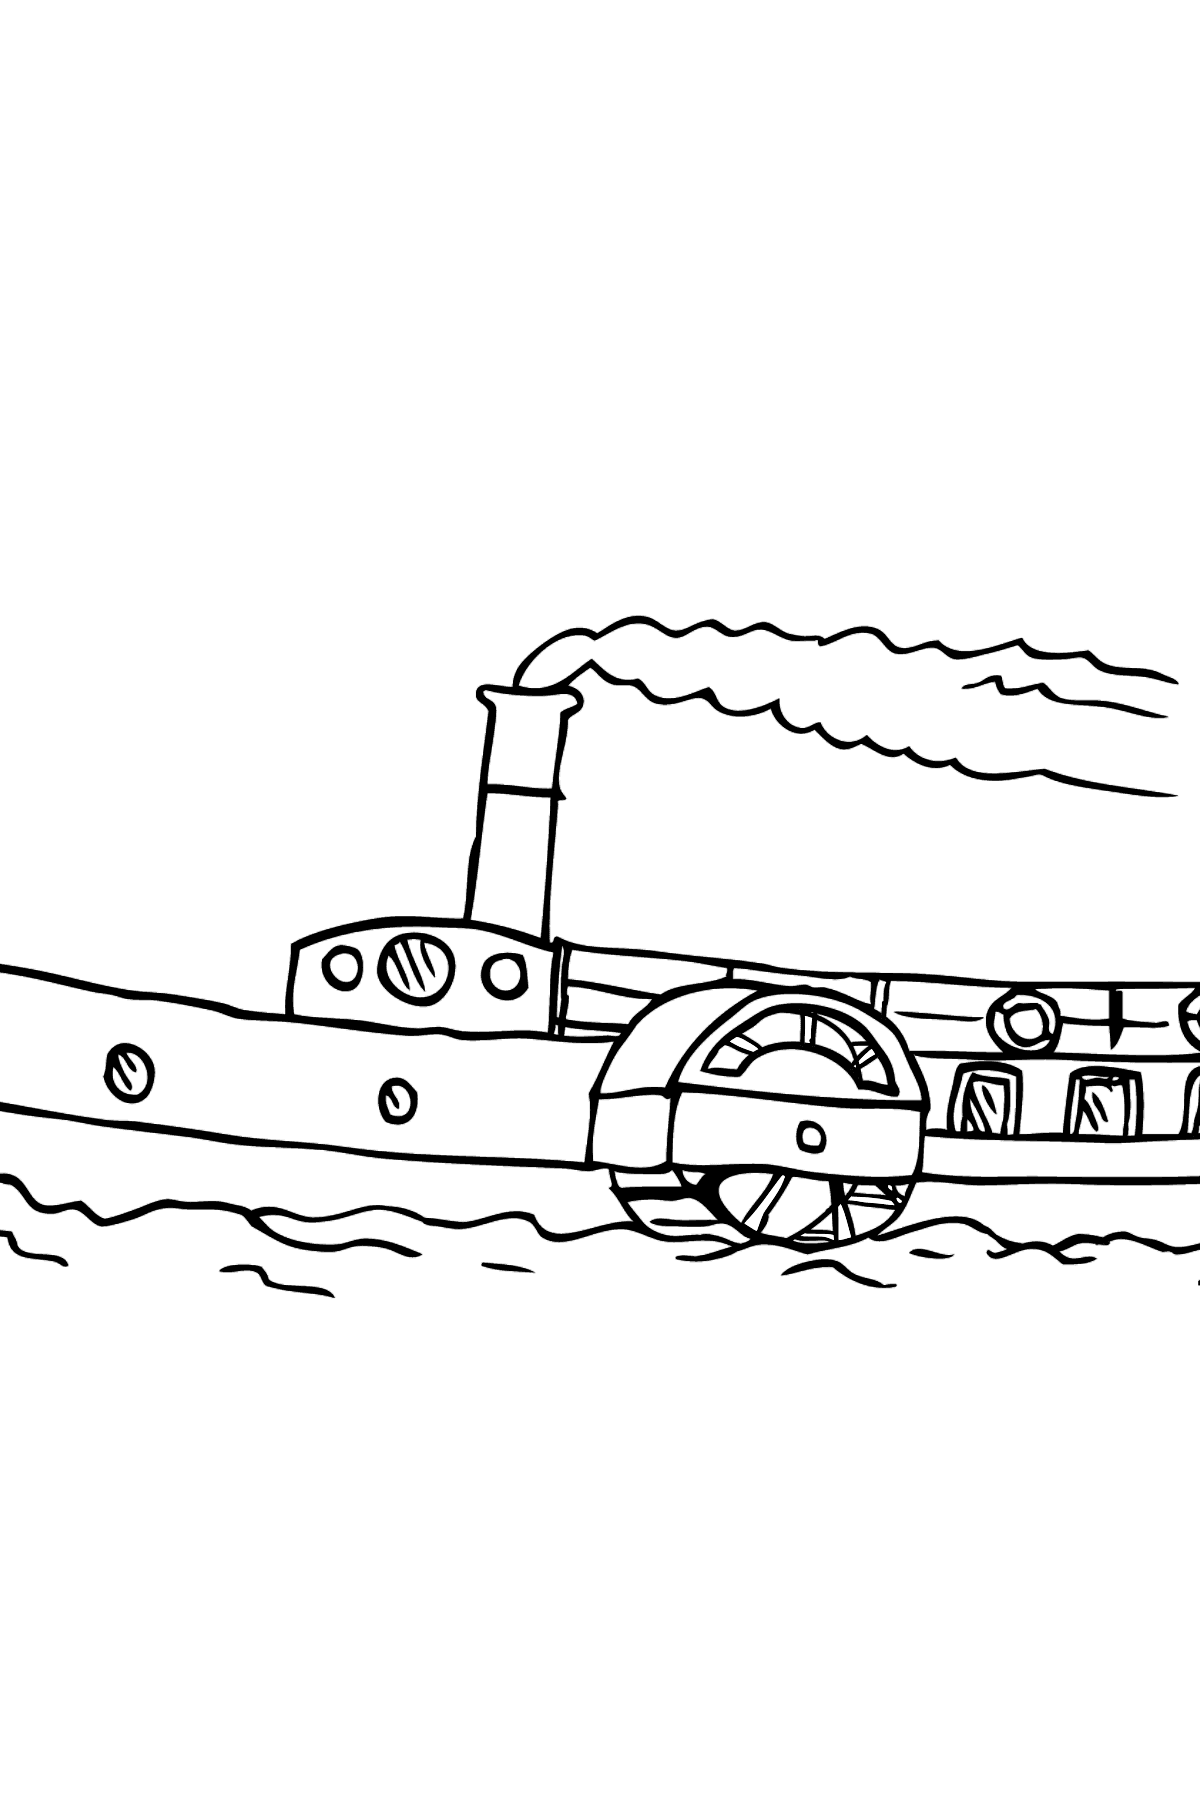 Coloring Page - A Ship with a Paddle Wheel - Coloring Pages for Kids